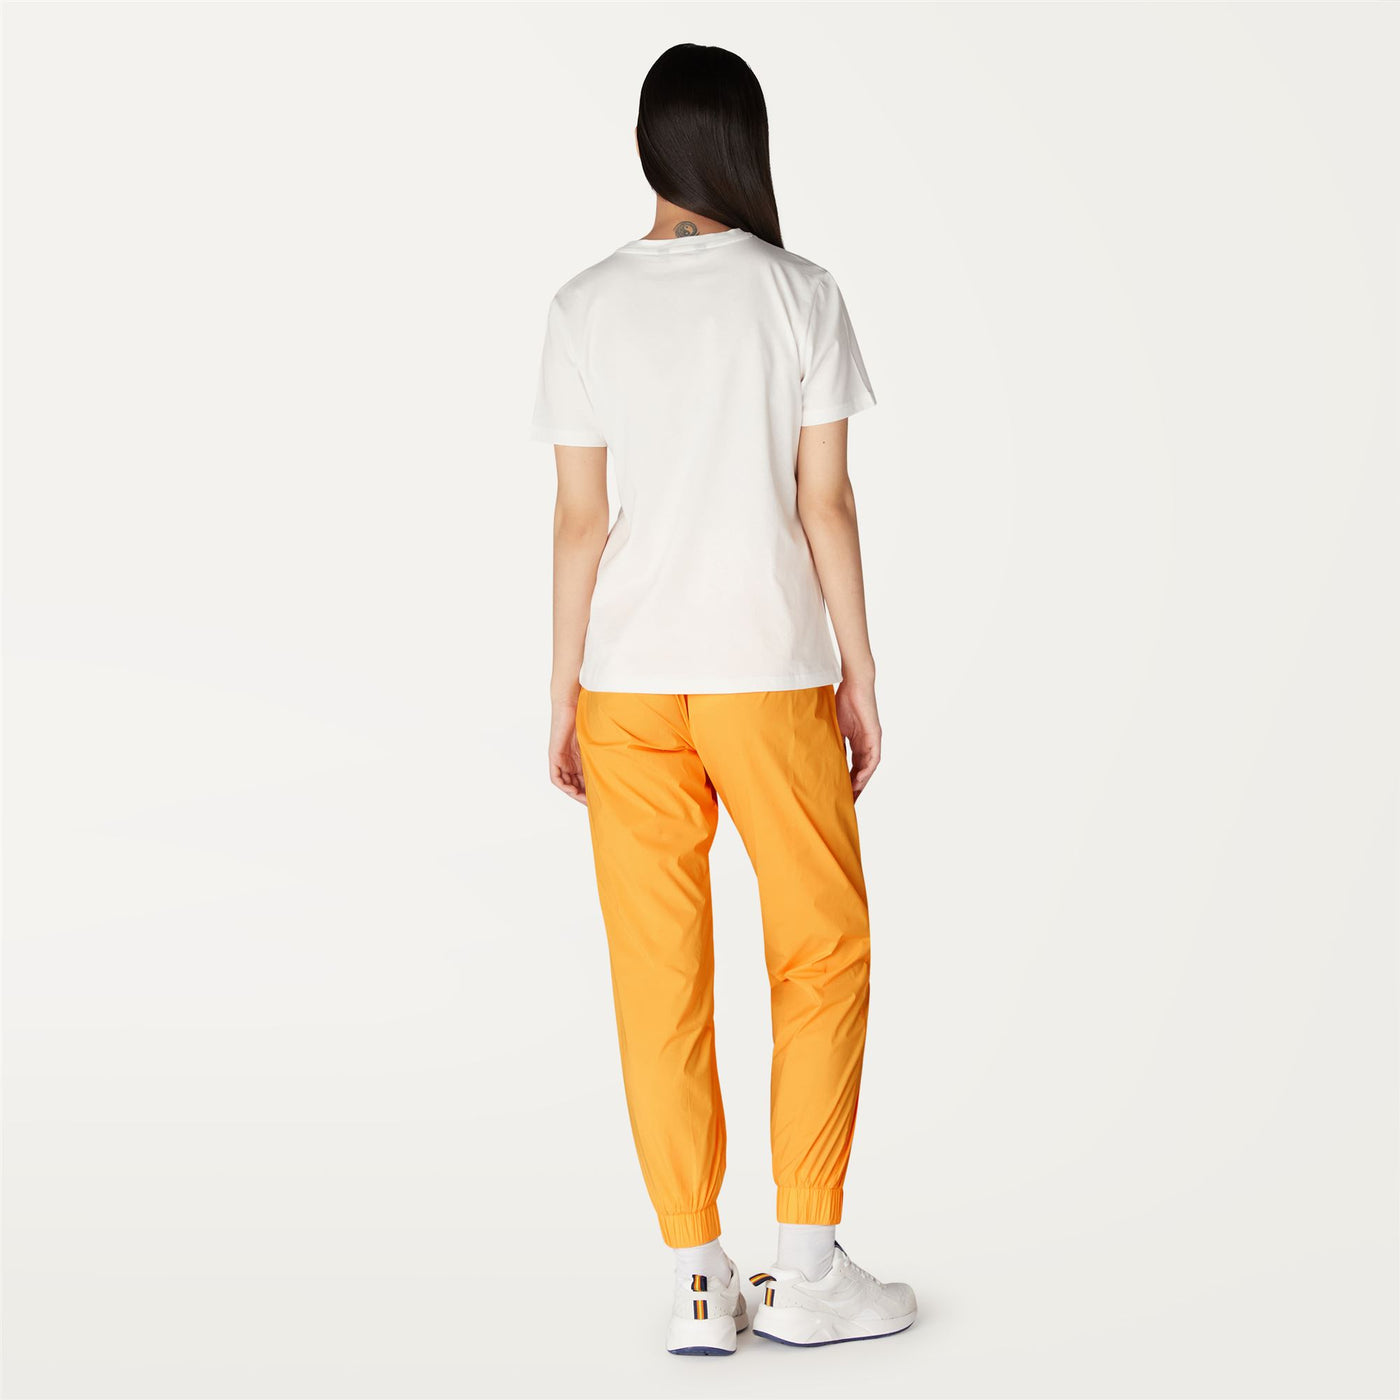 Pants Woman MELLY NY STRETCH Sport Trousers ORANGE SAFFRON Dressed Front Double		